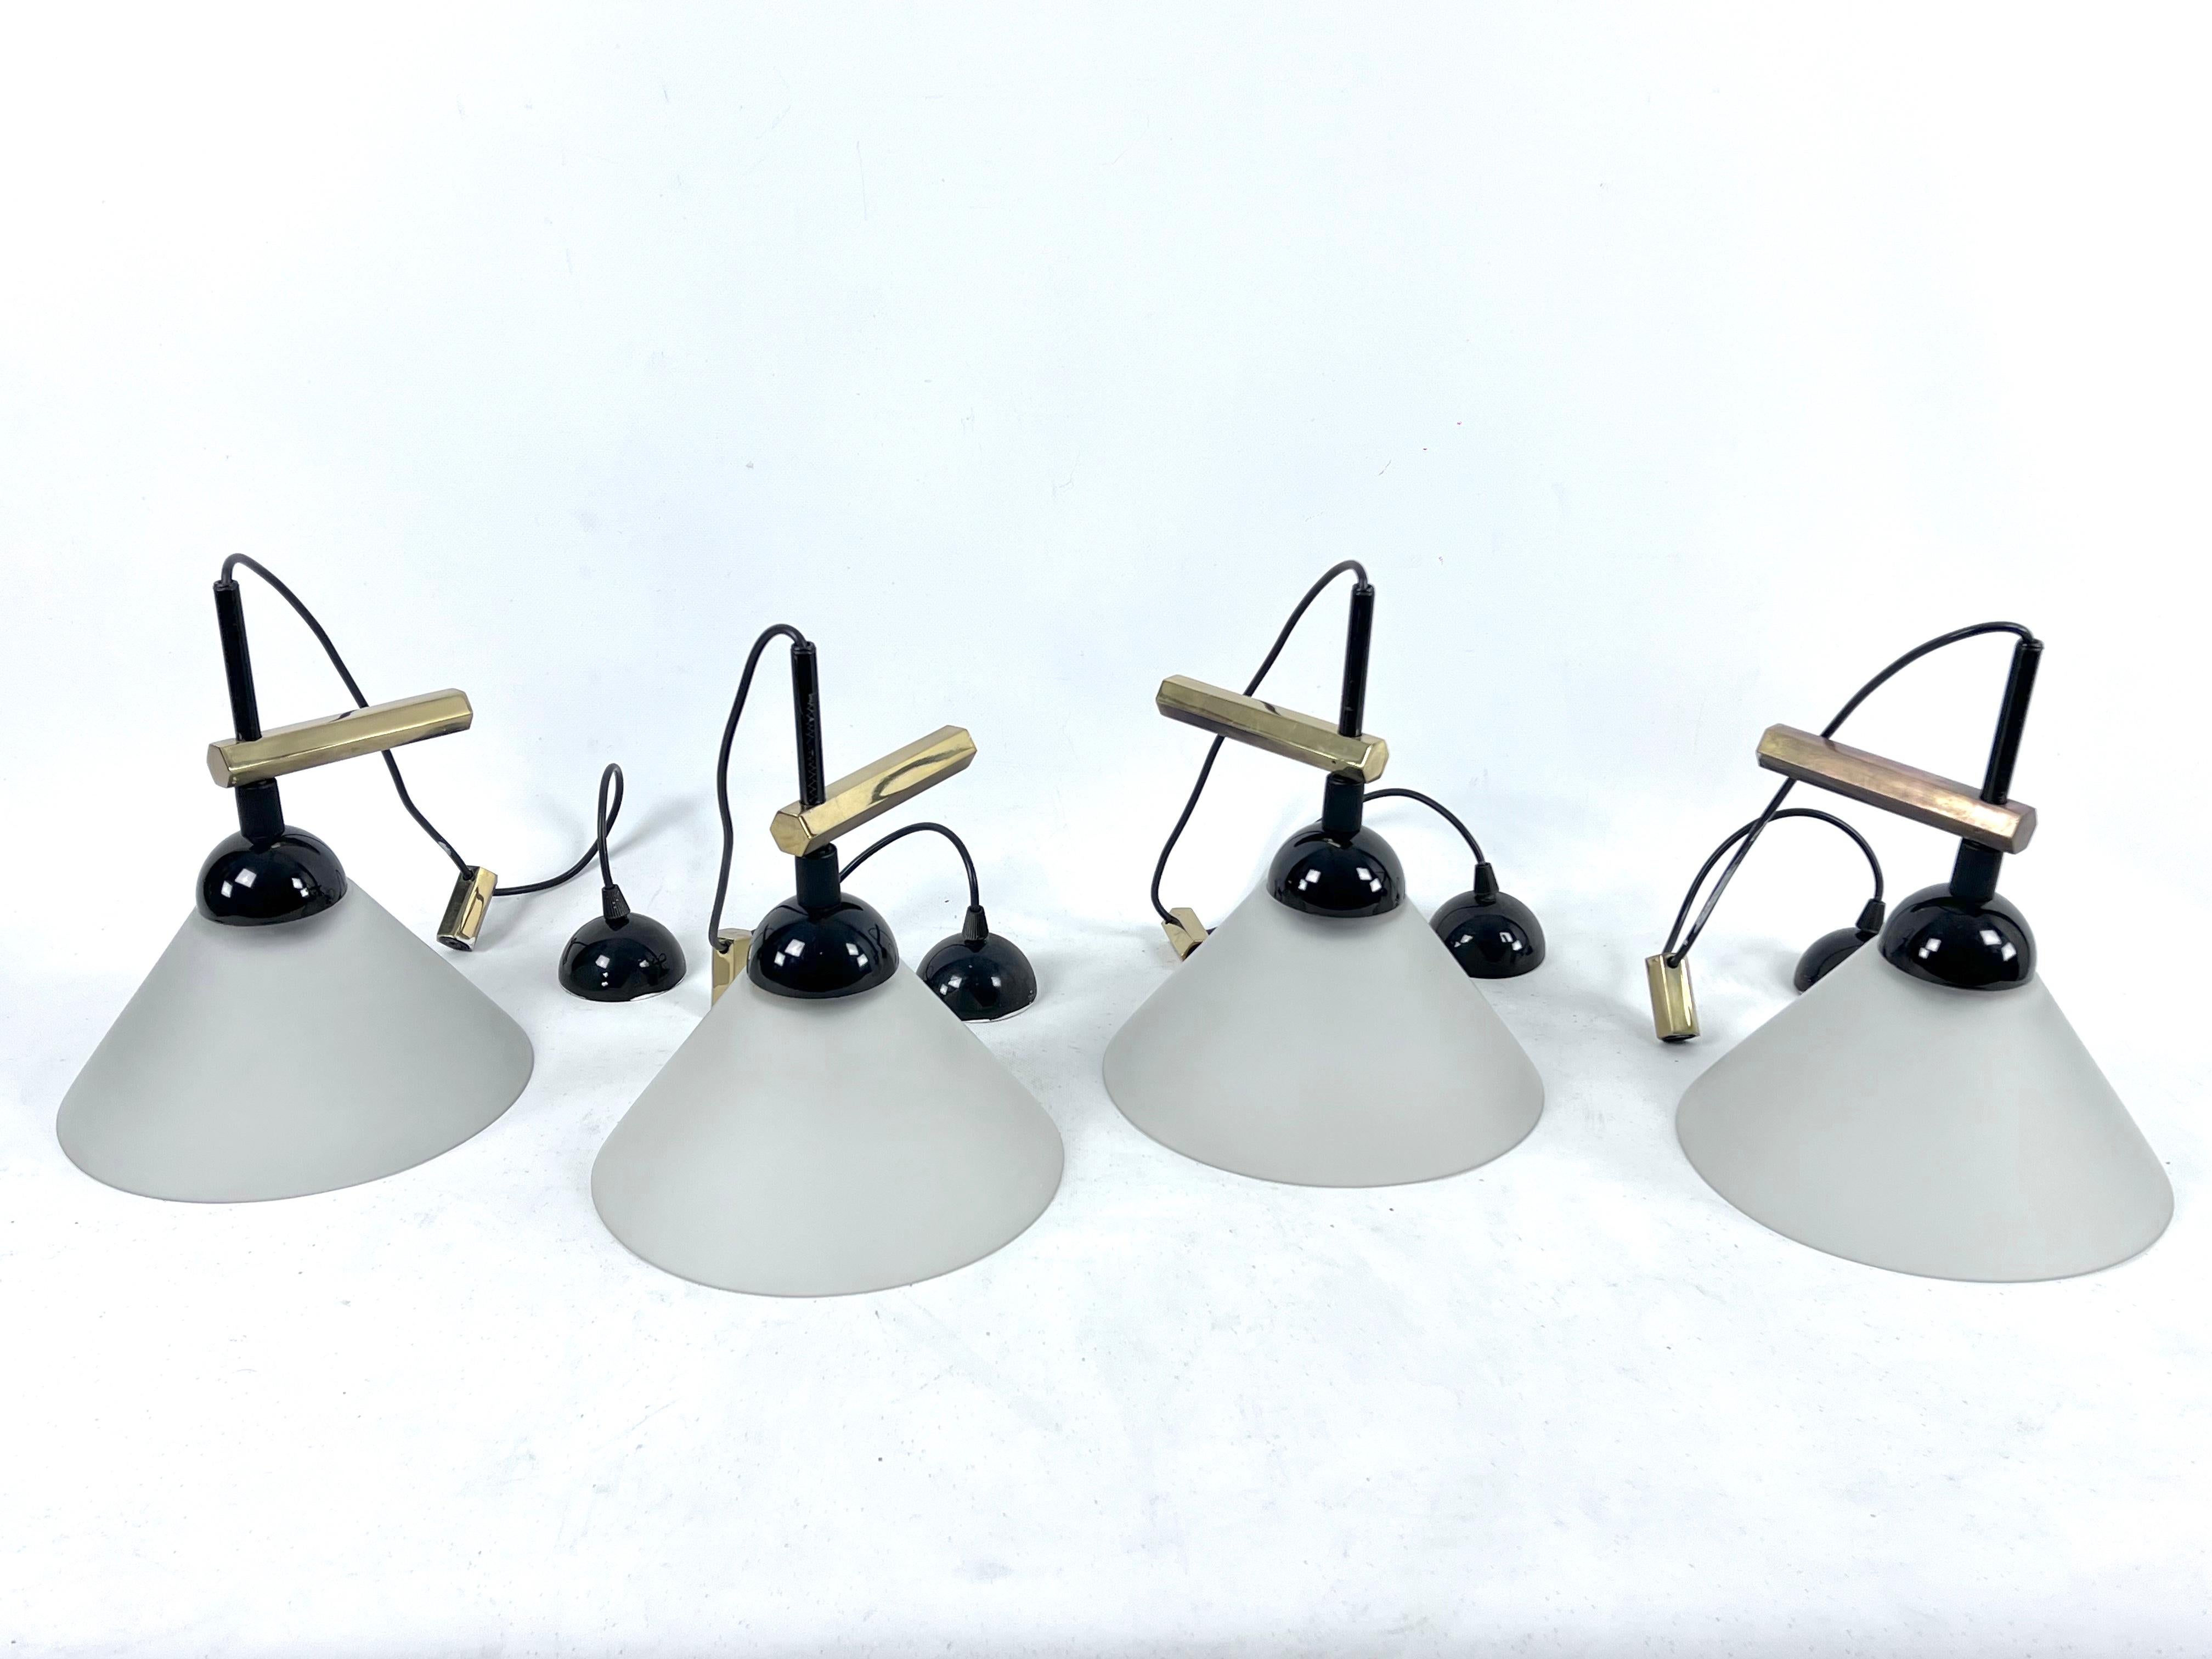 Set of four wall lamps by Quattrifolio. Made from Murano glass shade, solid brass and lacquered metal. Produced in Italy during the 70s. Each sconce mounts a socket for E27 bulb. The lamp is mounted on the wall through the long solid brass bracket,